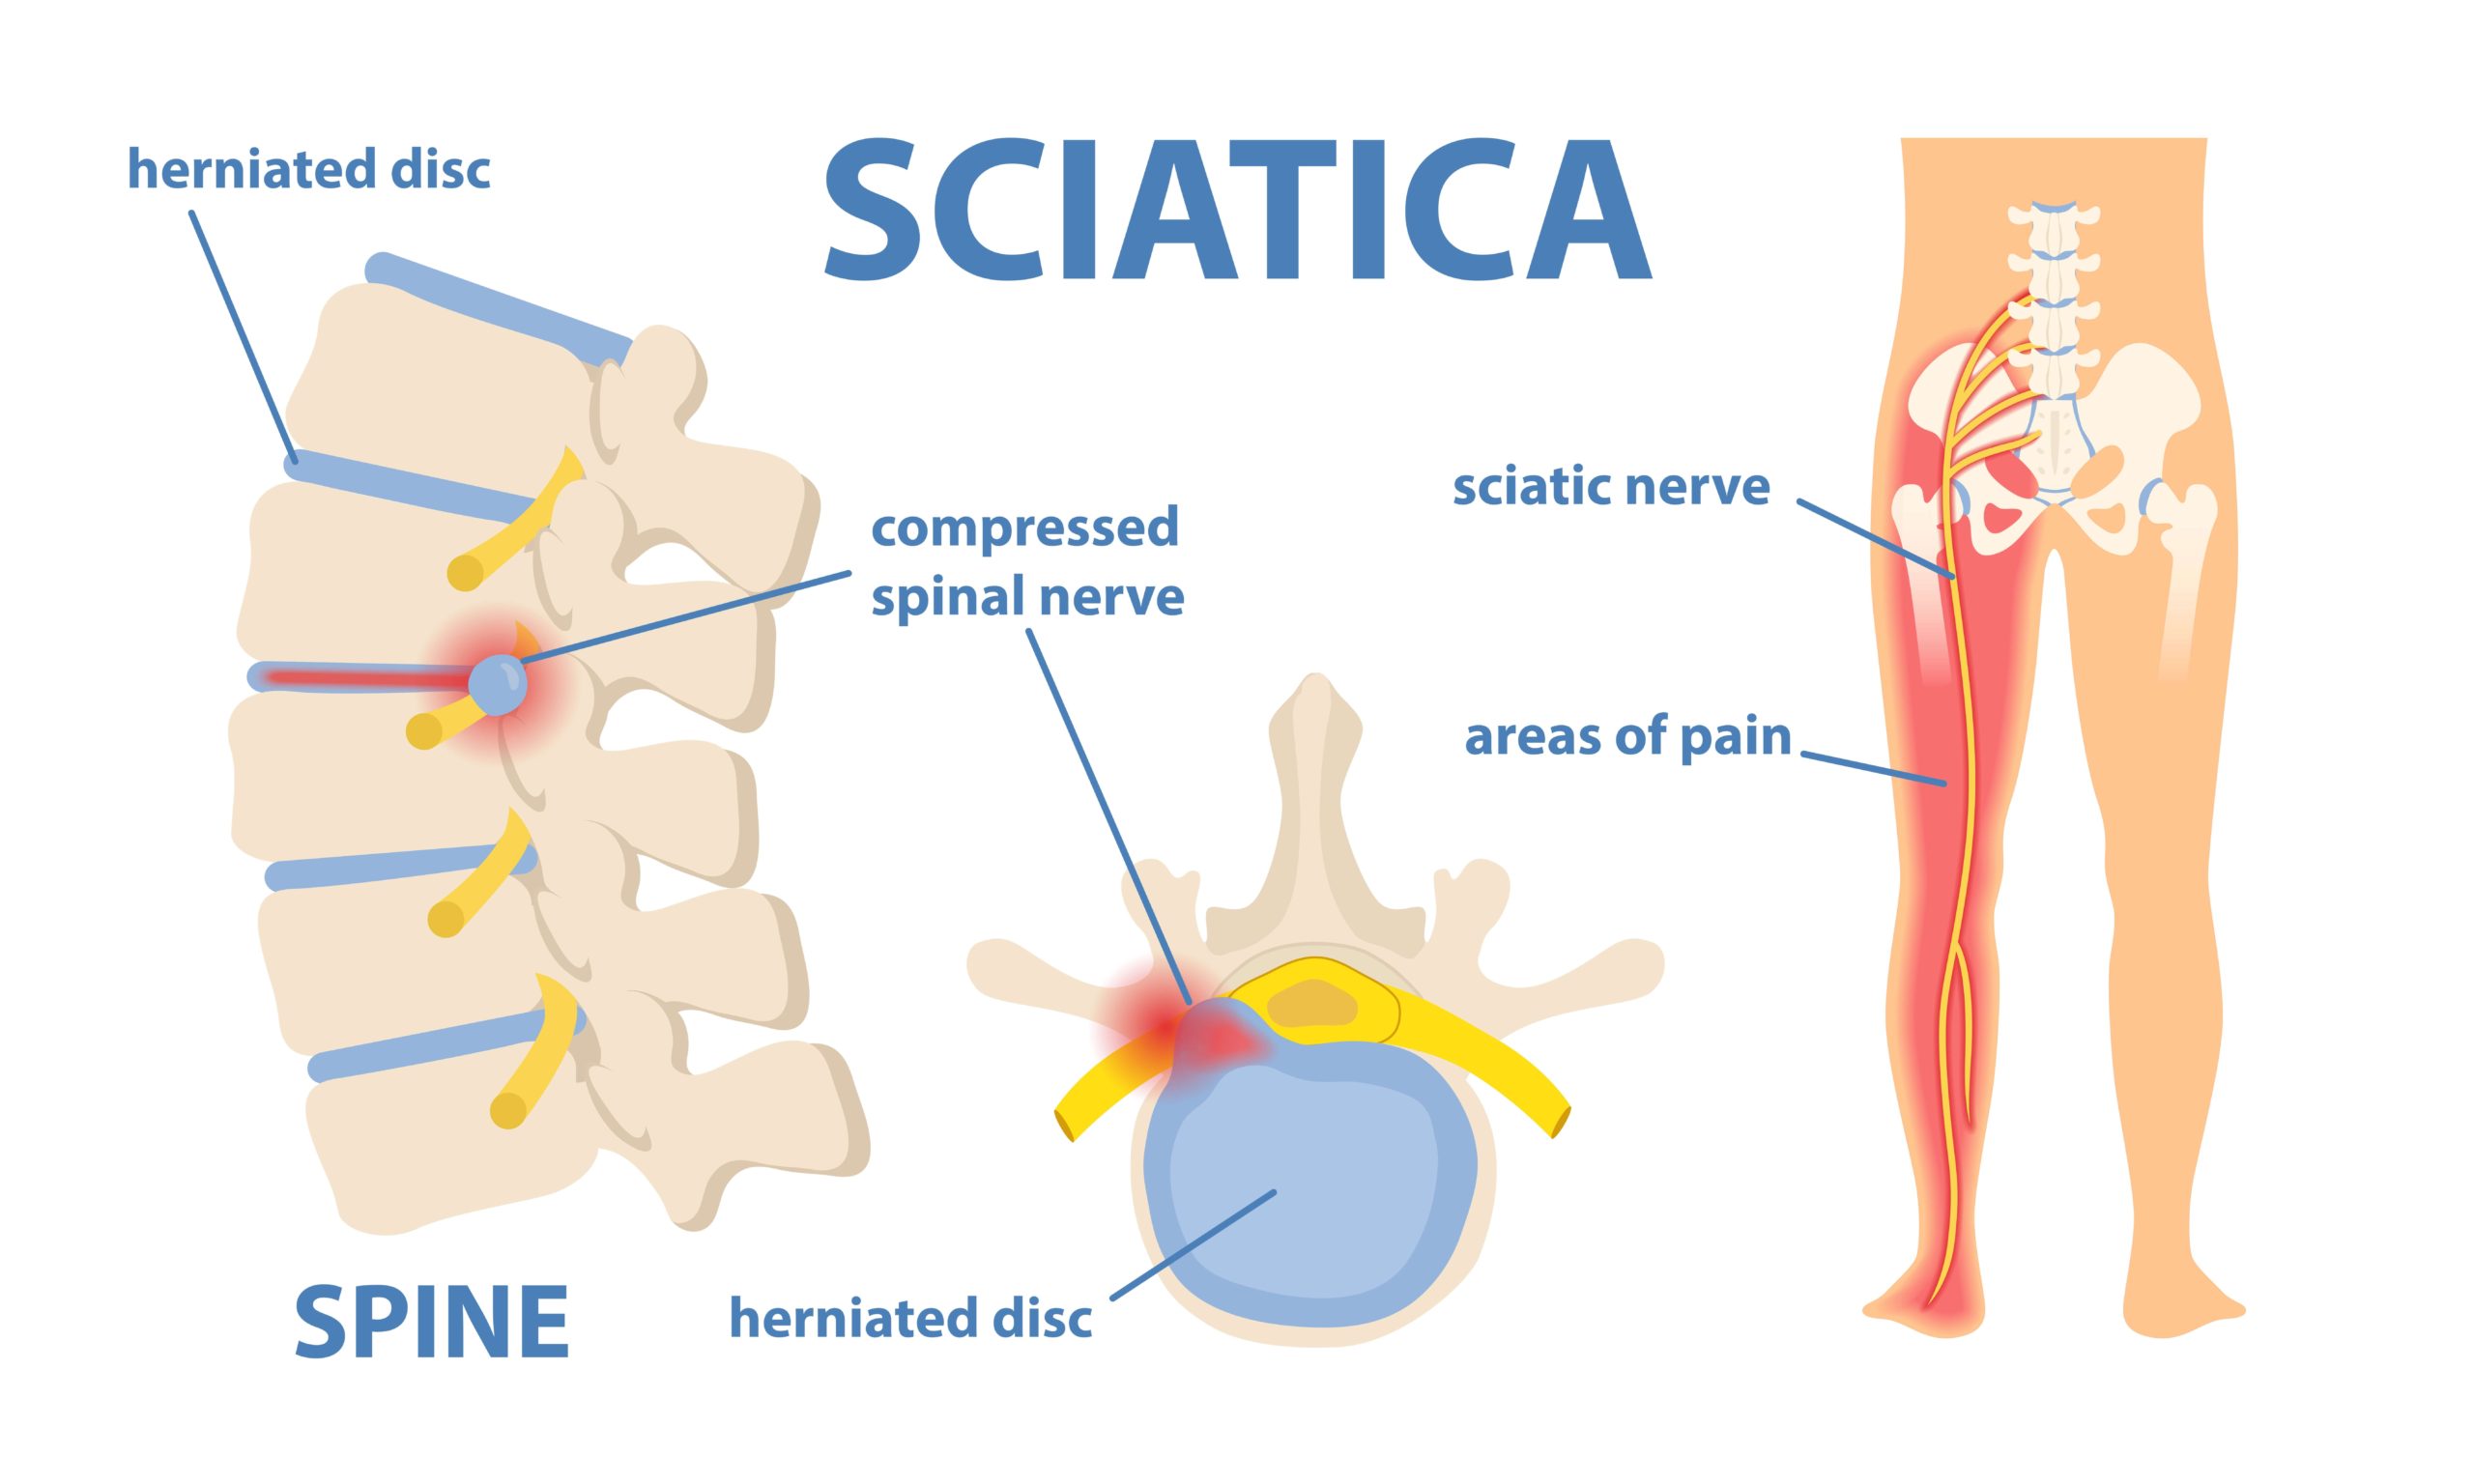 image showing how sciatic nerve pain can be caused via herniated disc